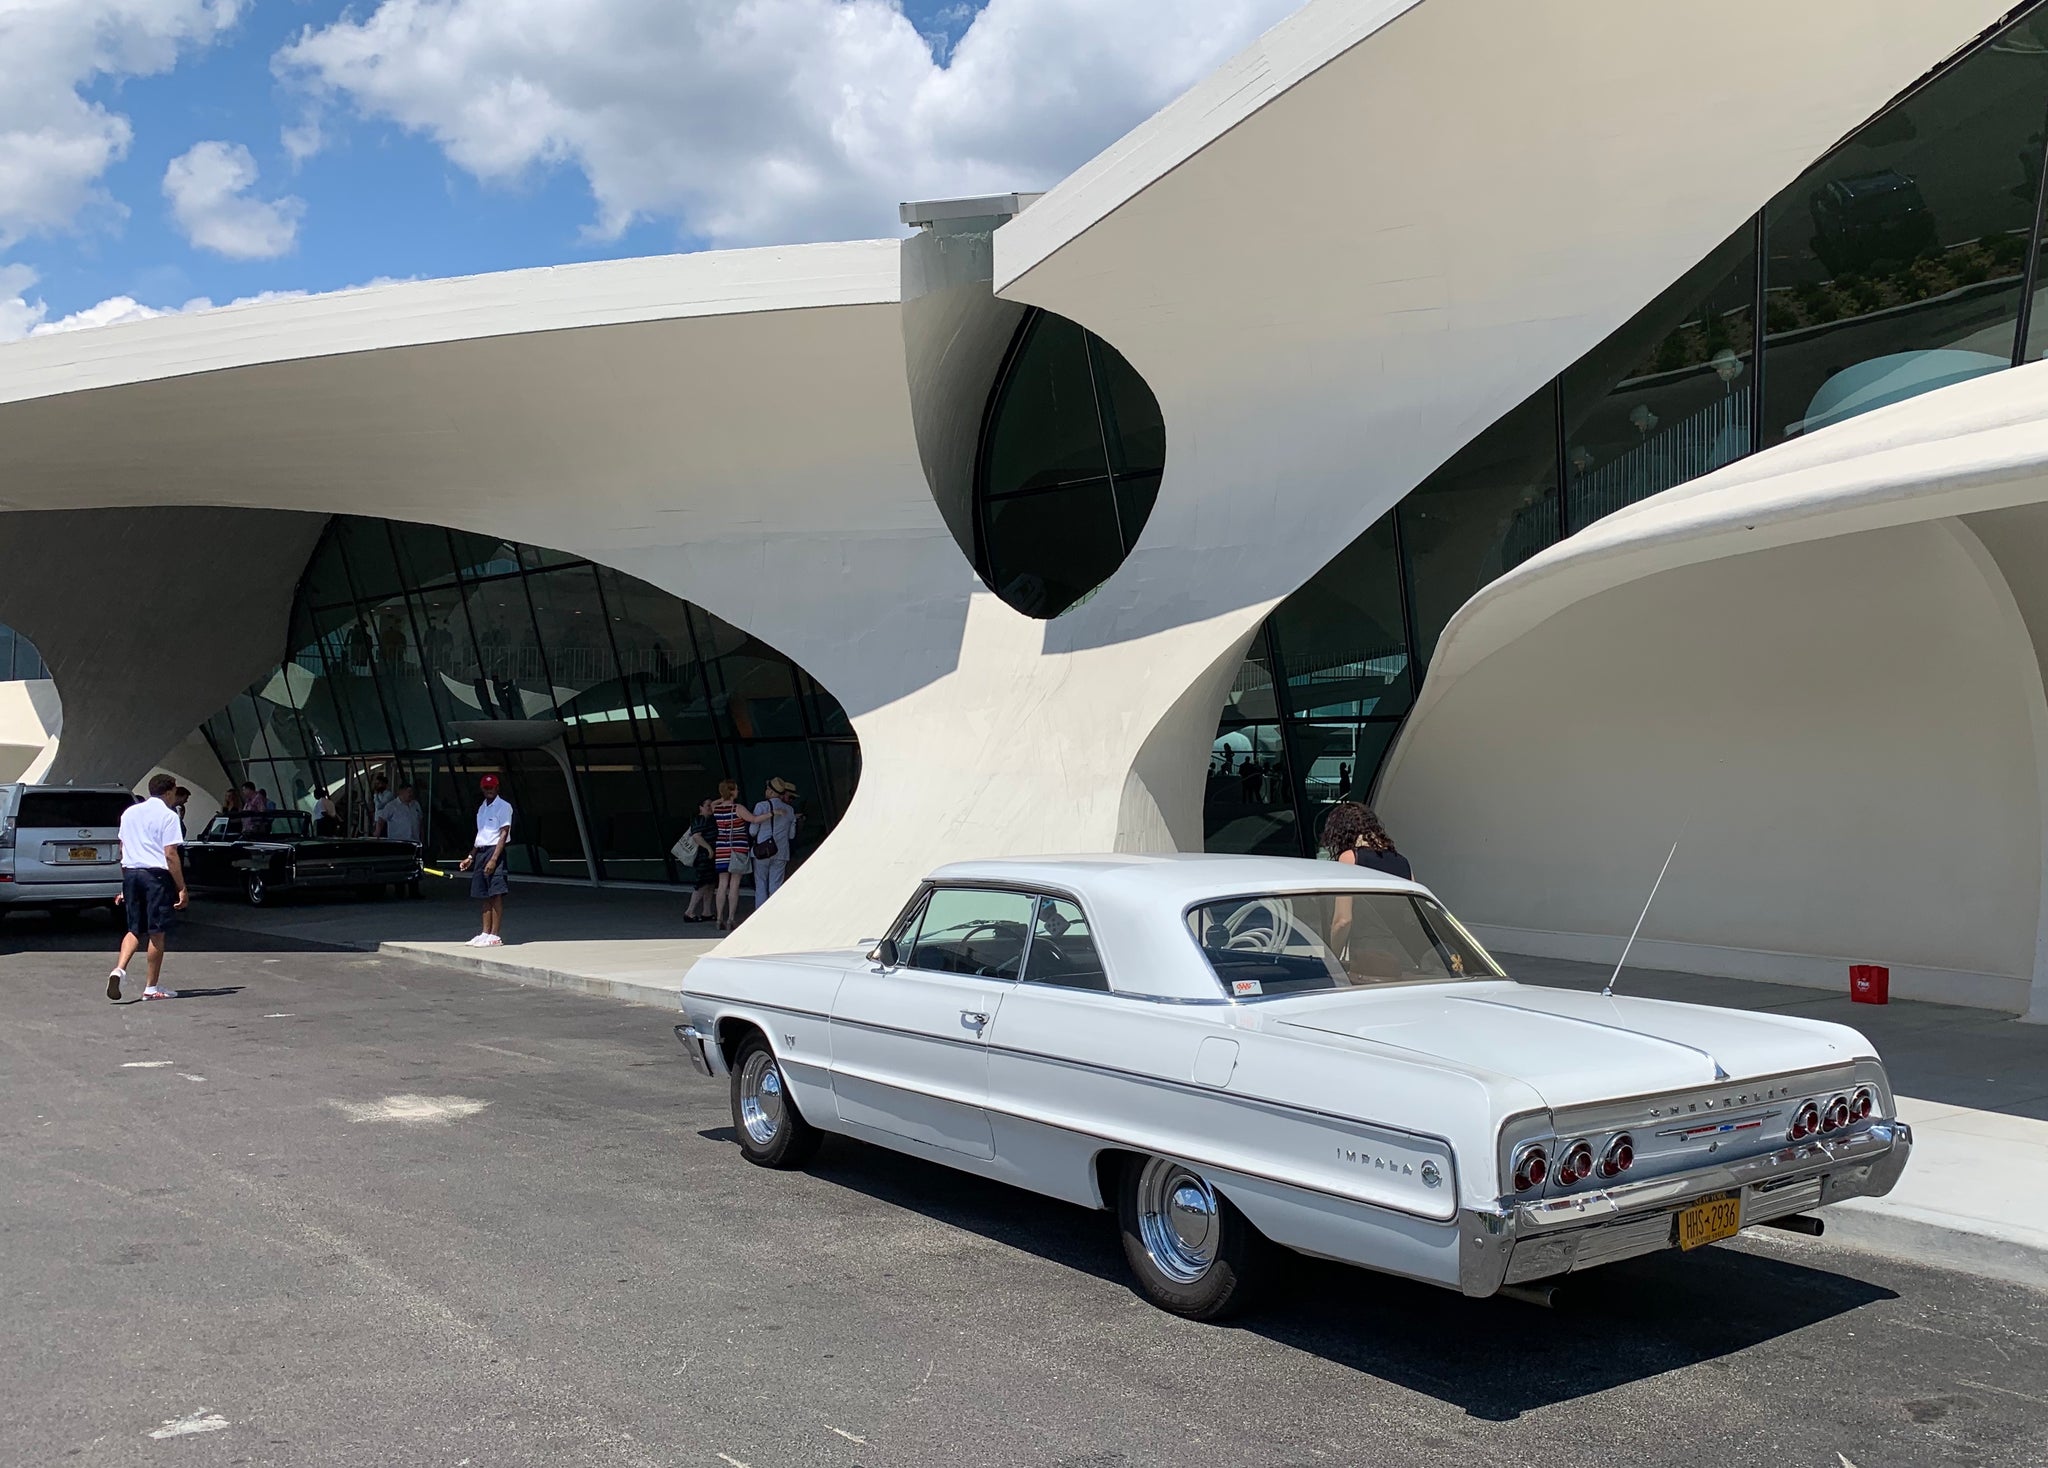 TWA Hotel leaving the past behind